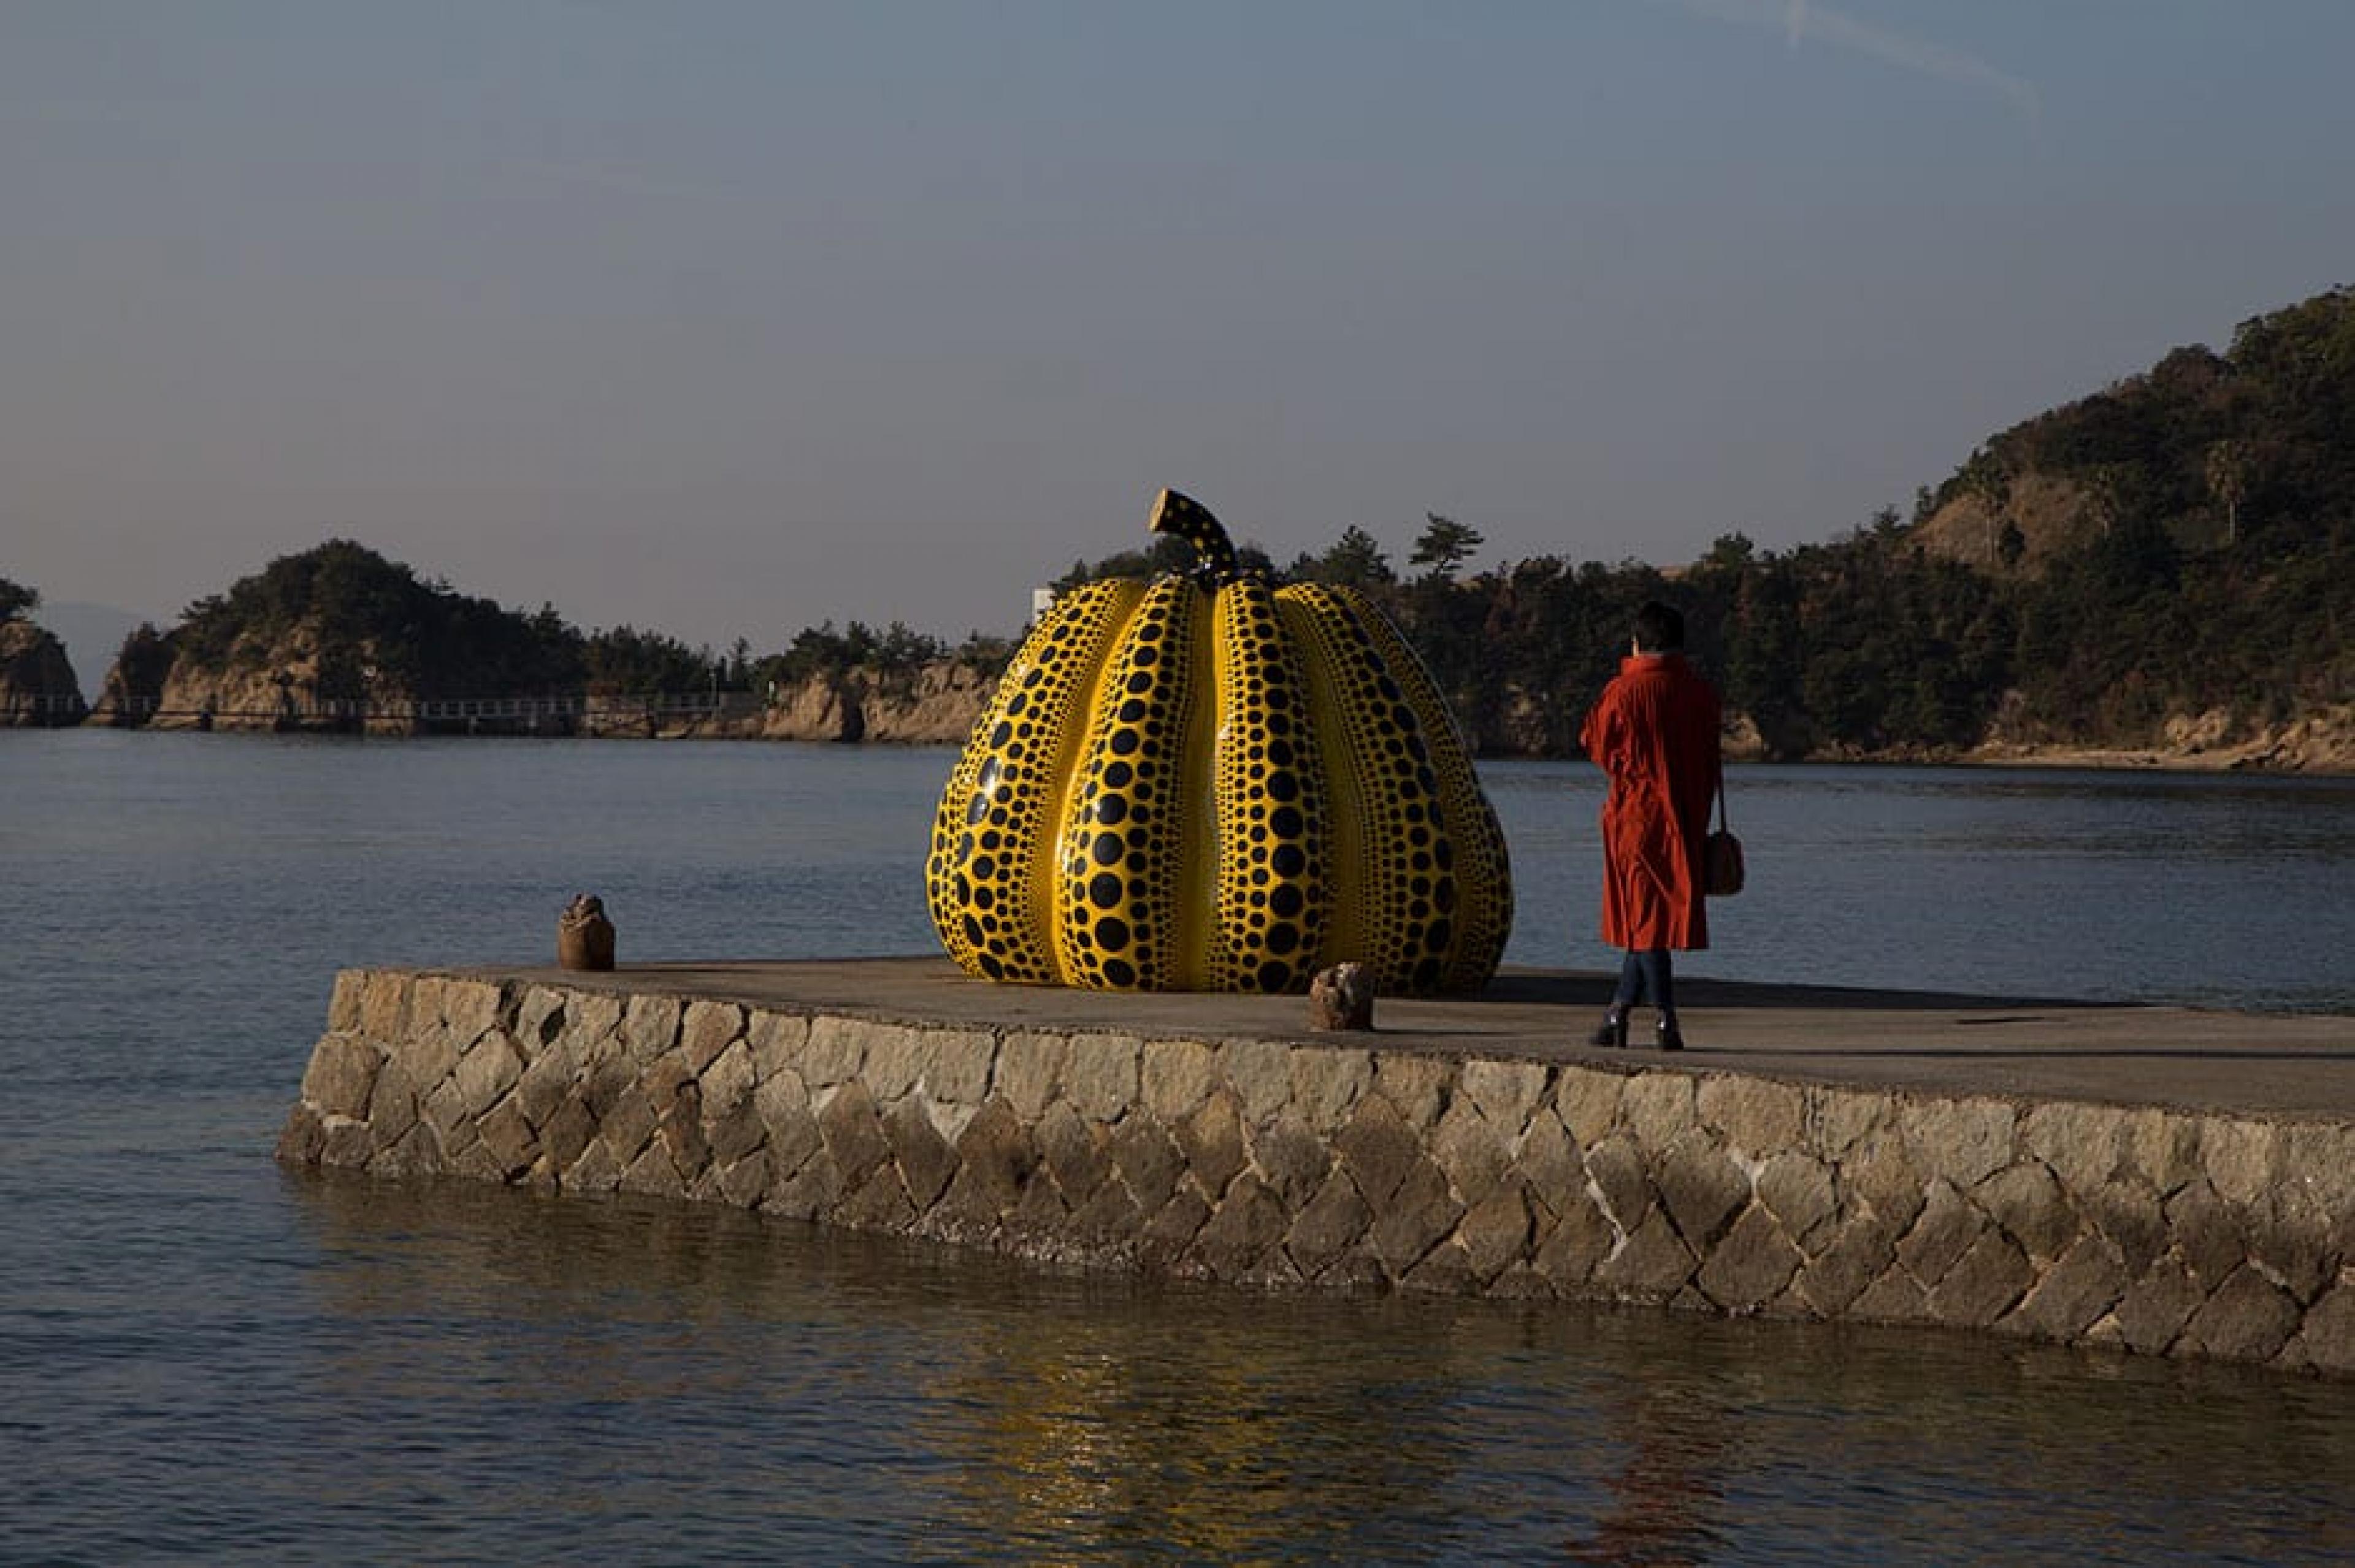 Large yellow sculpture near Benesse House on Naoshima Island in Japan